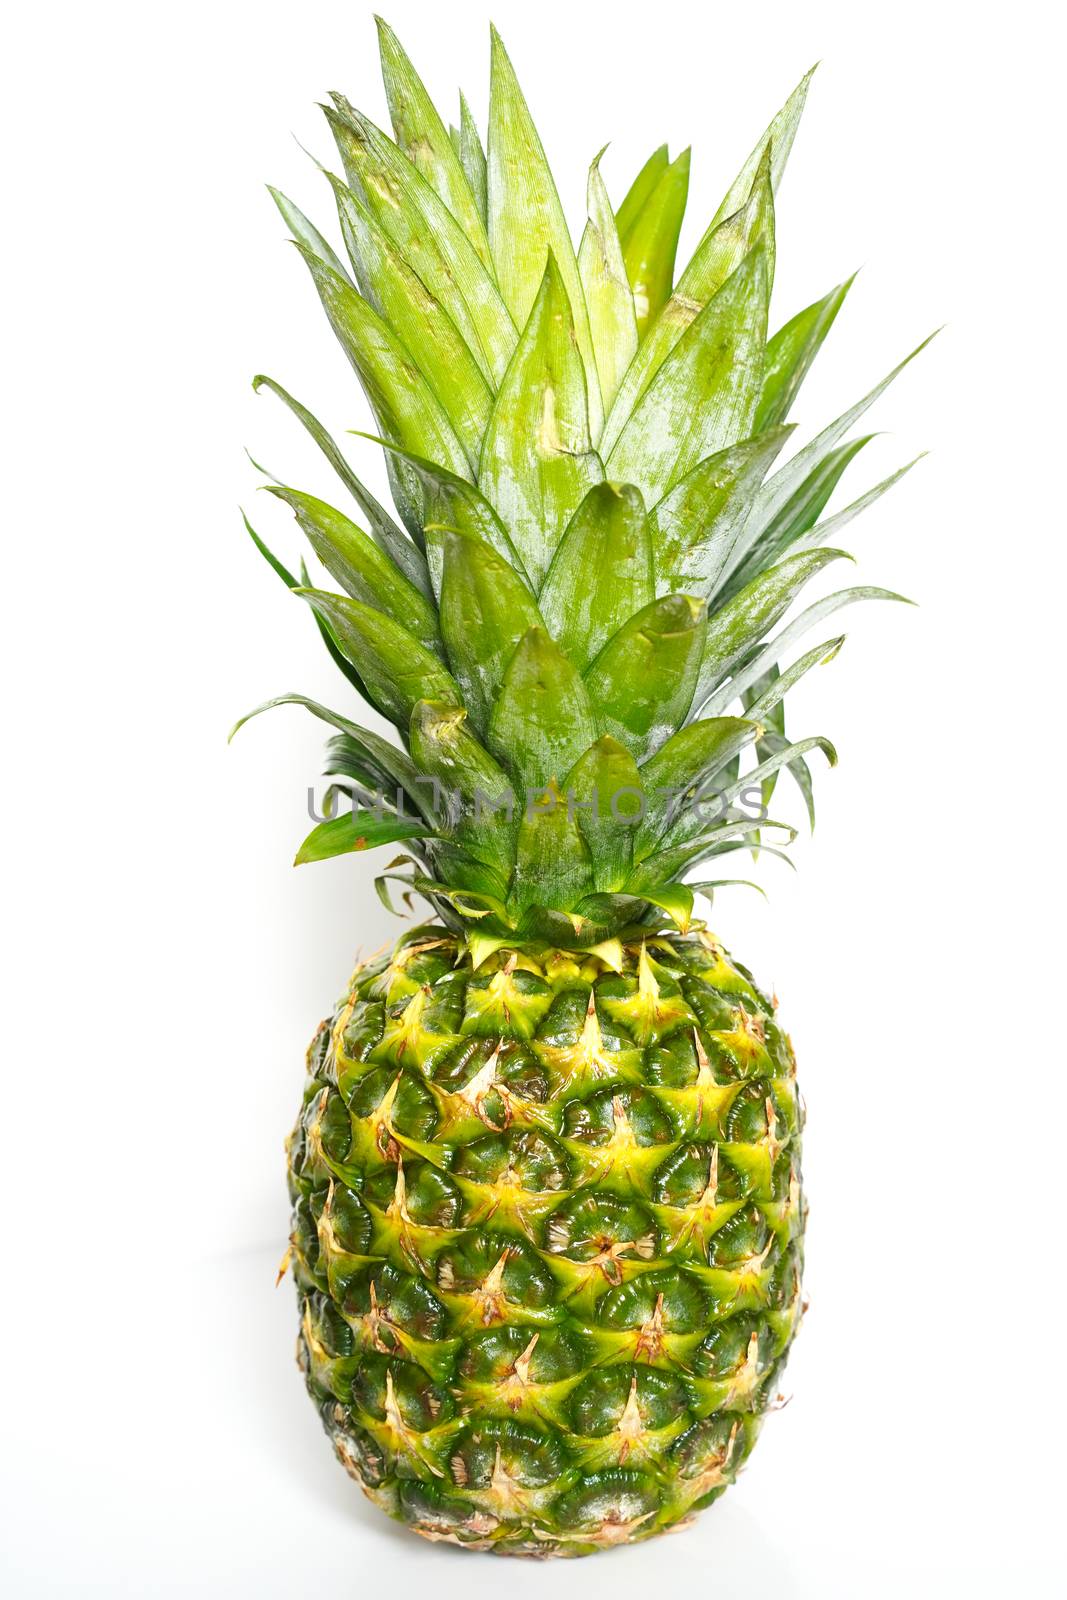 A whole pineapple against a plain white background